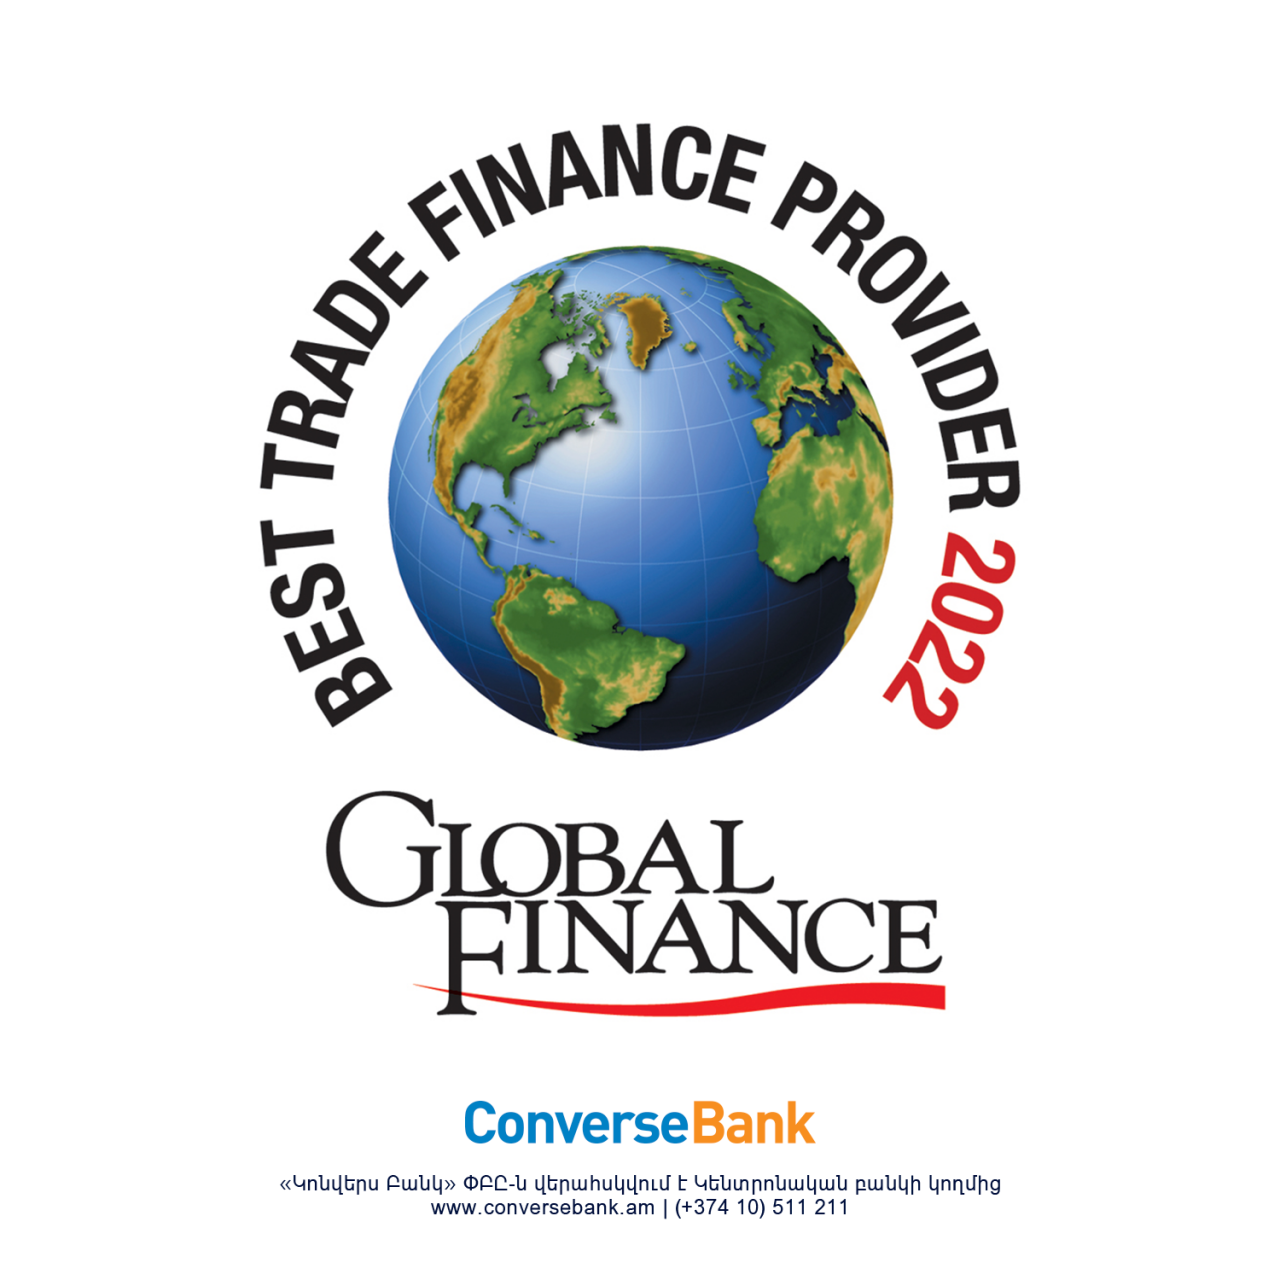 Converse Bank is the best Trade Finance Provider 2022 in Armenia according to Global Finance  1